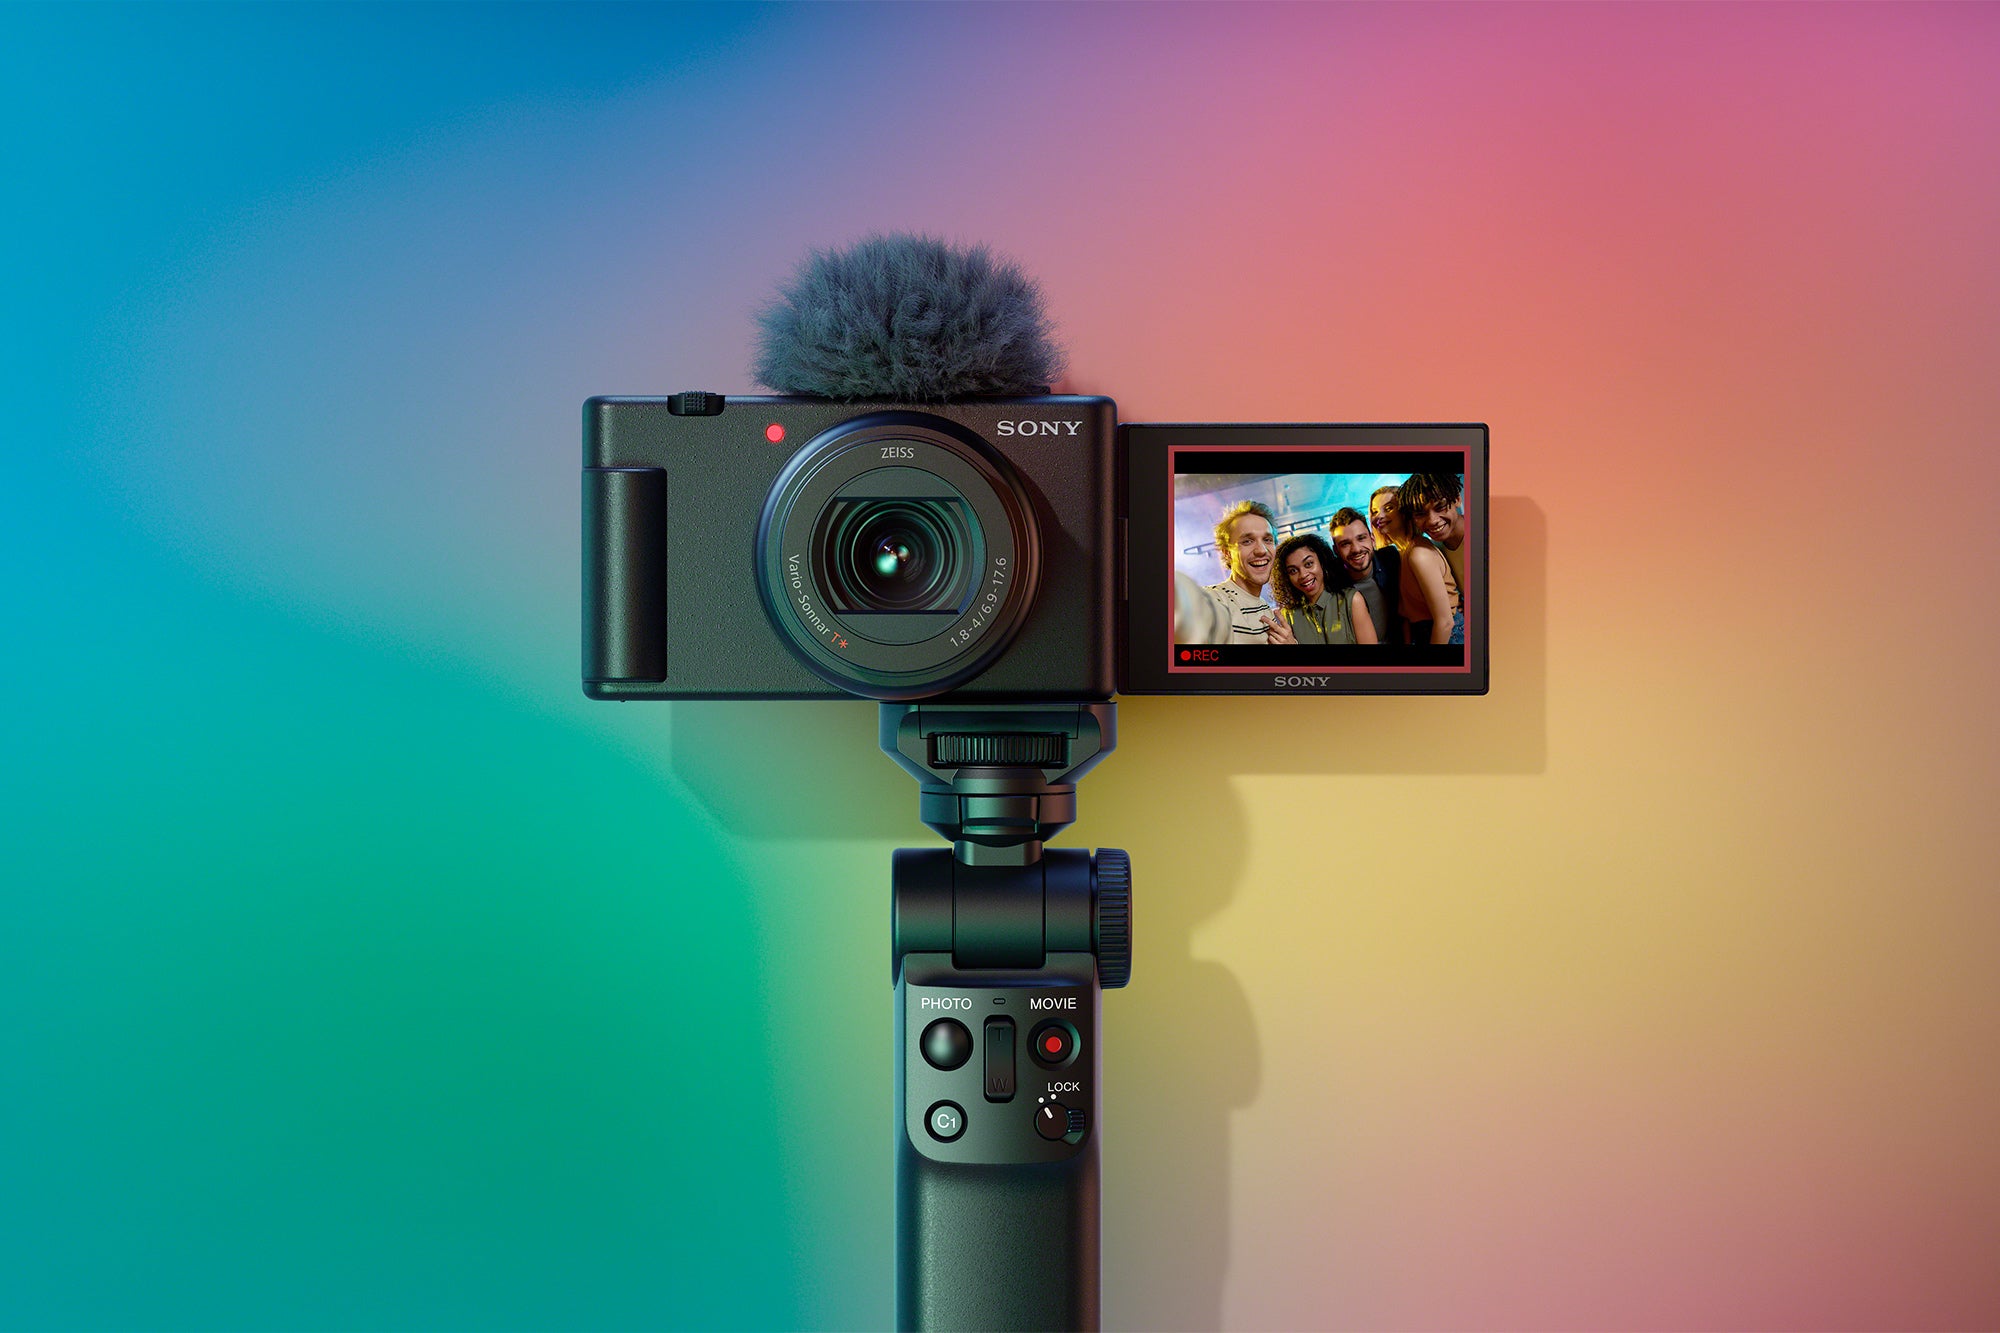 The Sony ZV-1 II camera has a wider lens and more vlogging